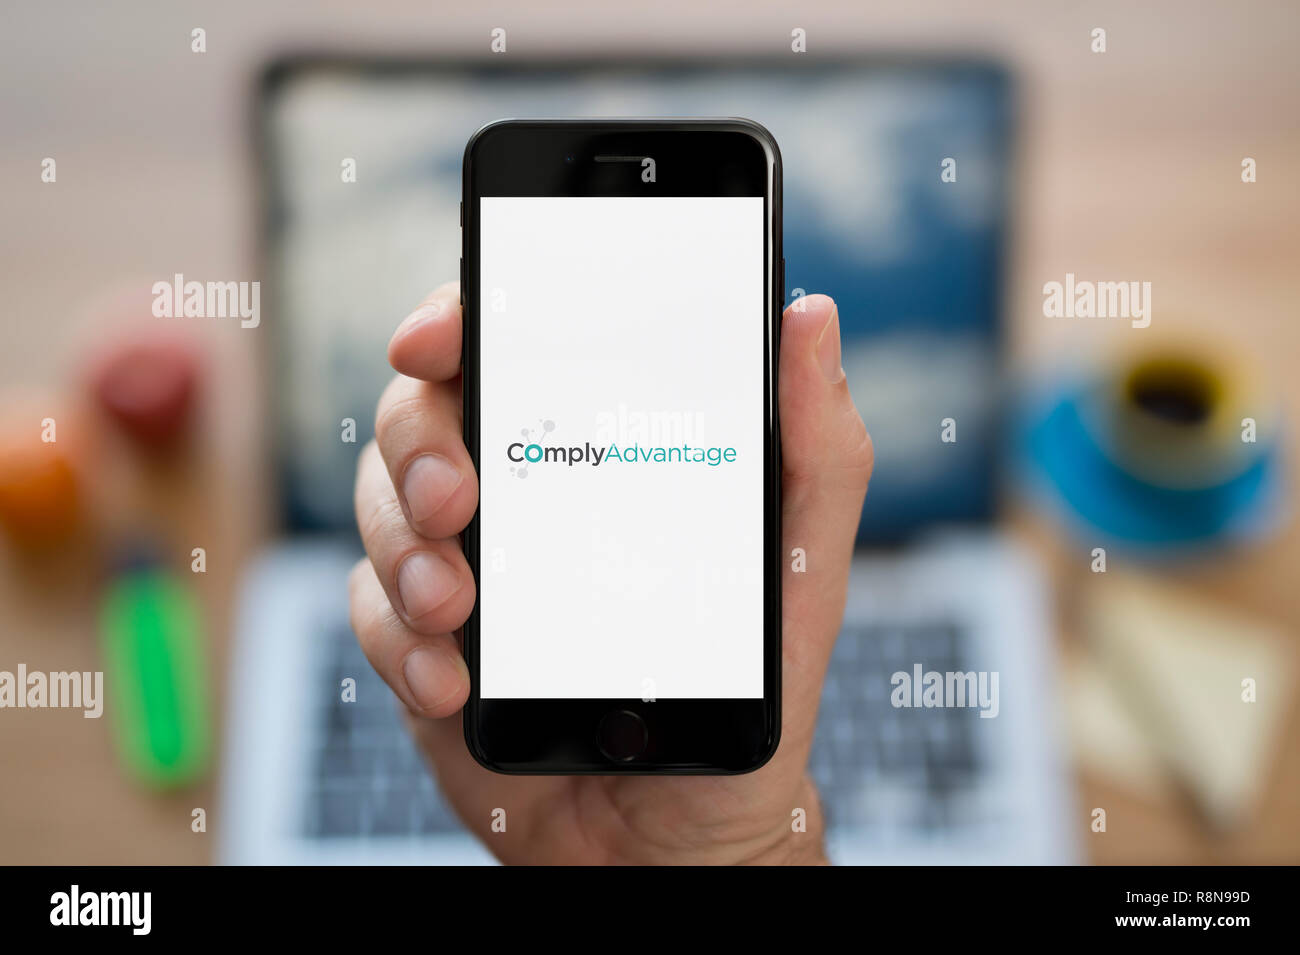 A man looks at his iPhone which displays the Comply Advantage logo (Editorial use only). Stock Photo